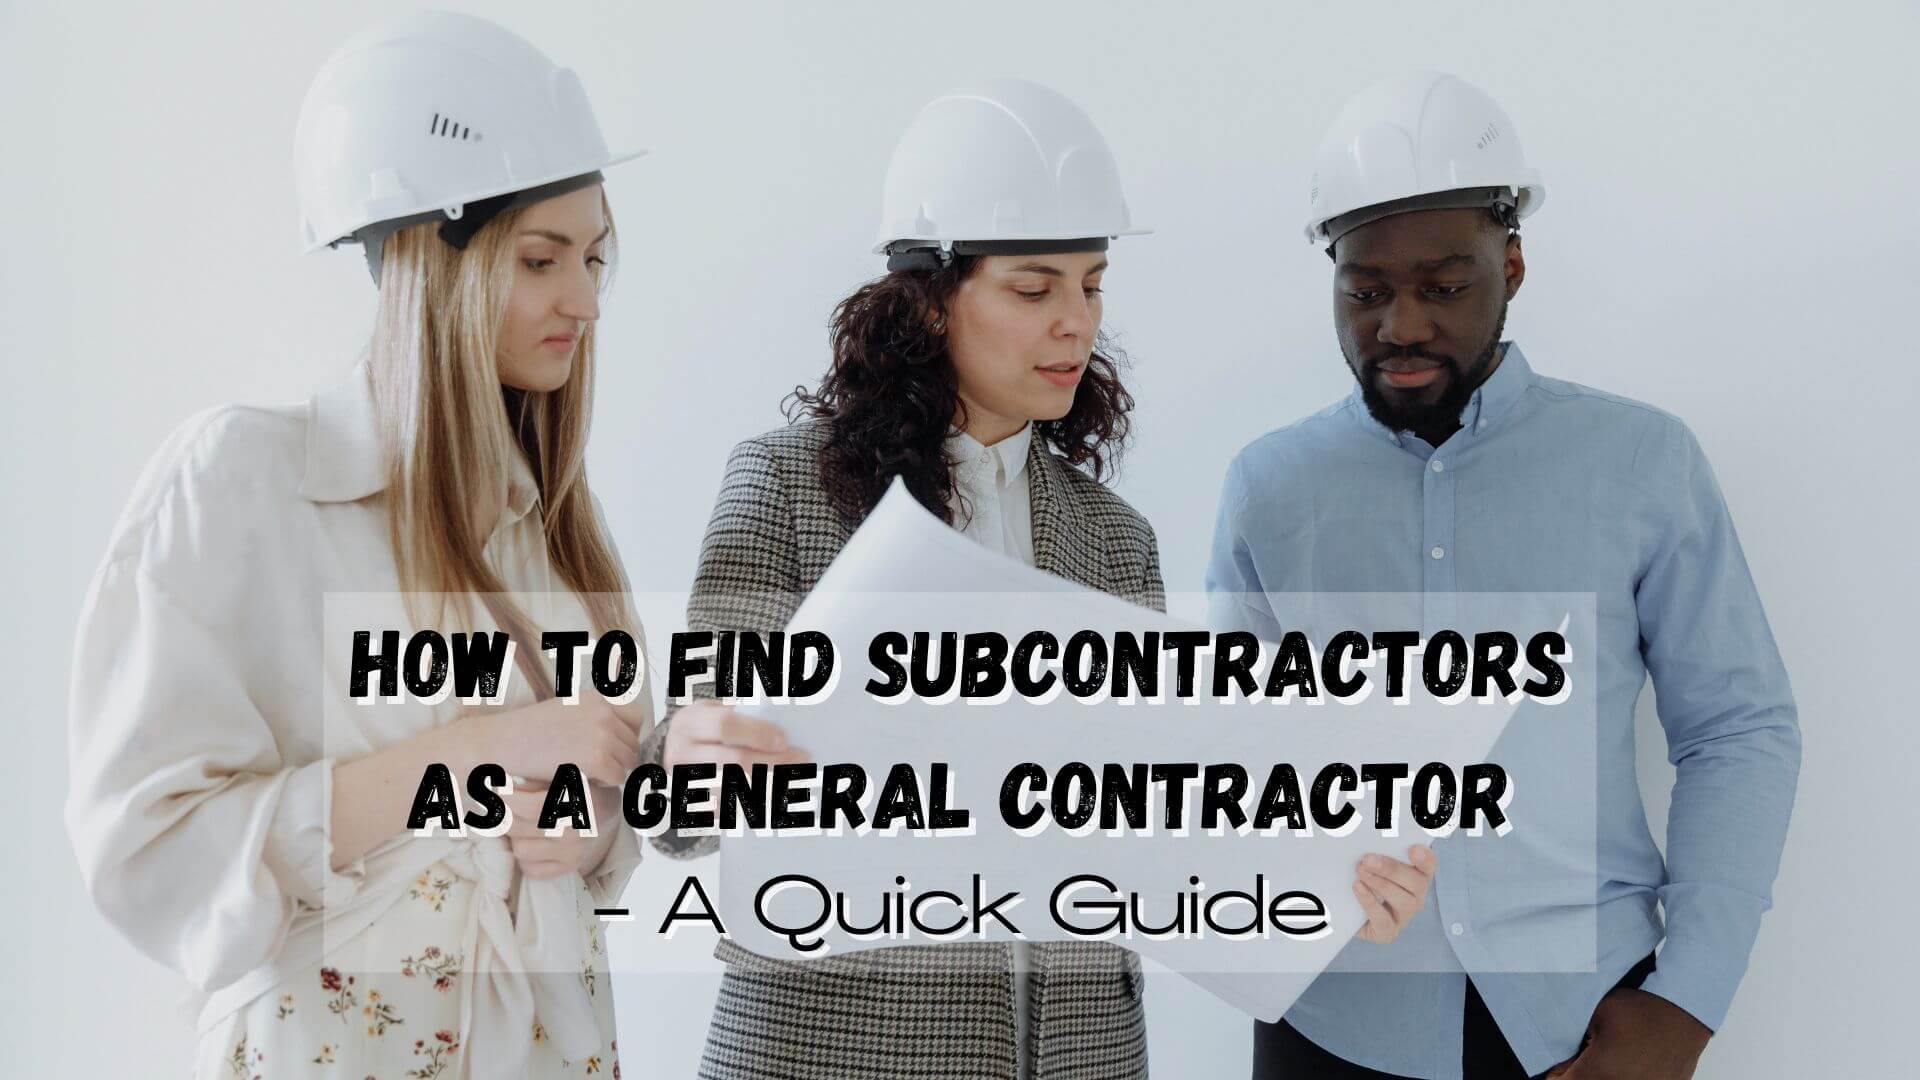 Subcontractors is essential to complete your construction project. Here's how to find the right subcontractors as a general contractor.